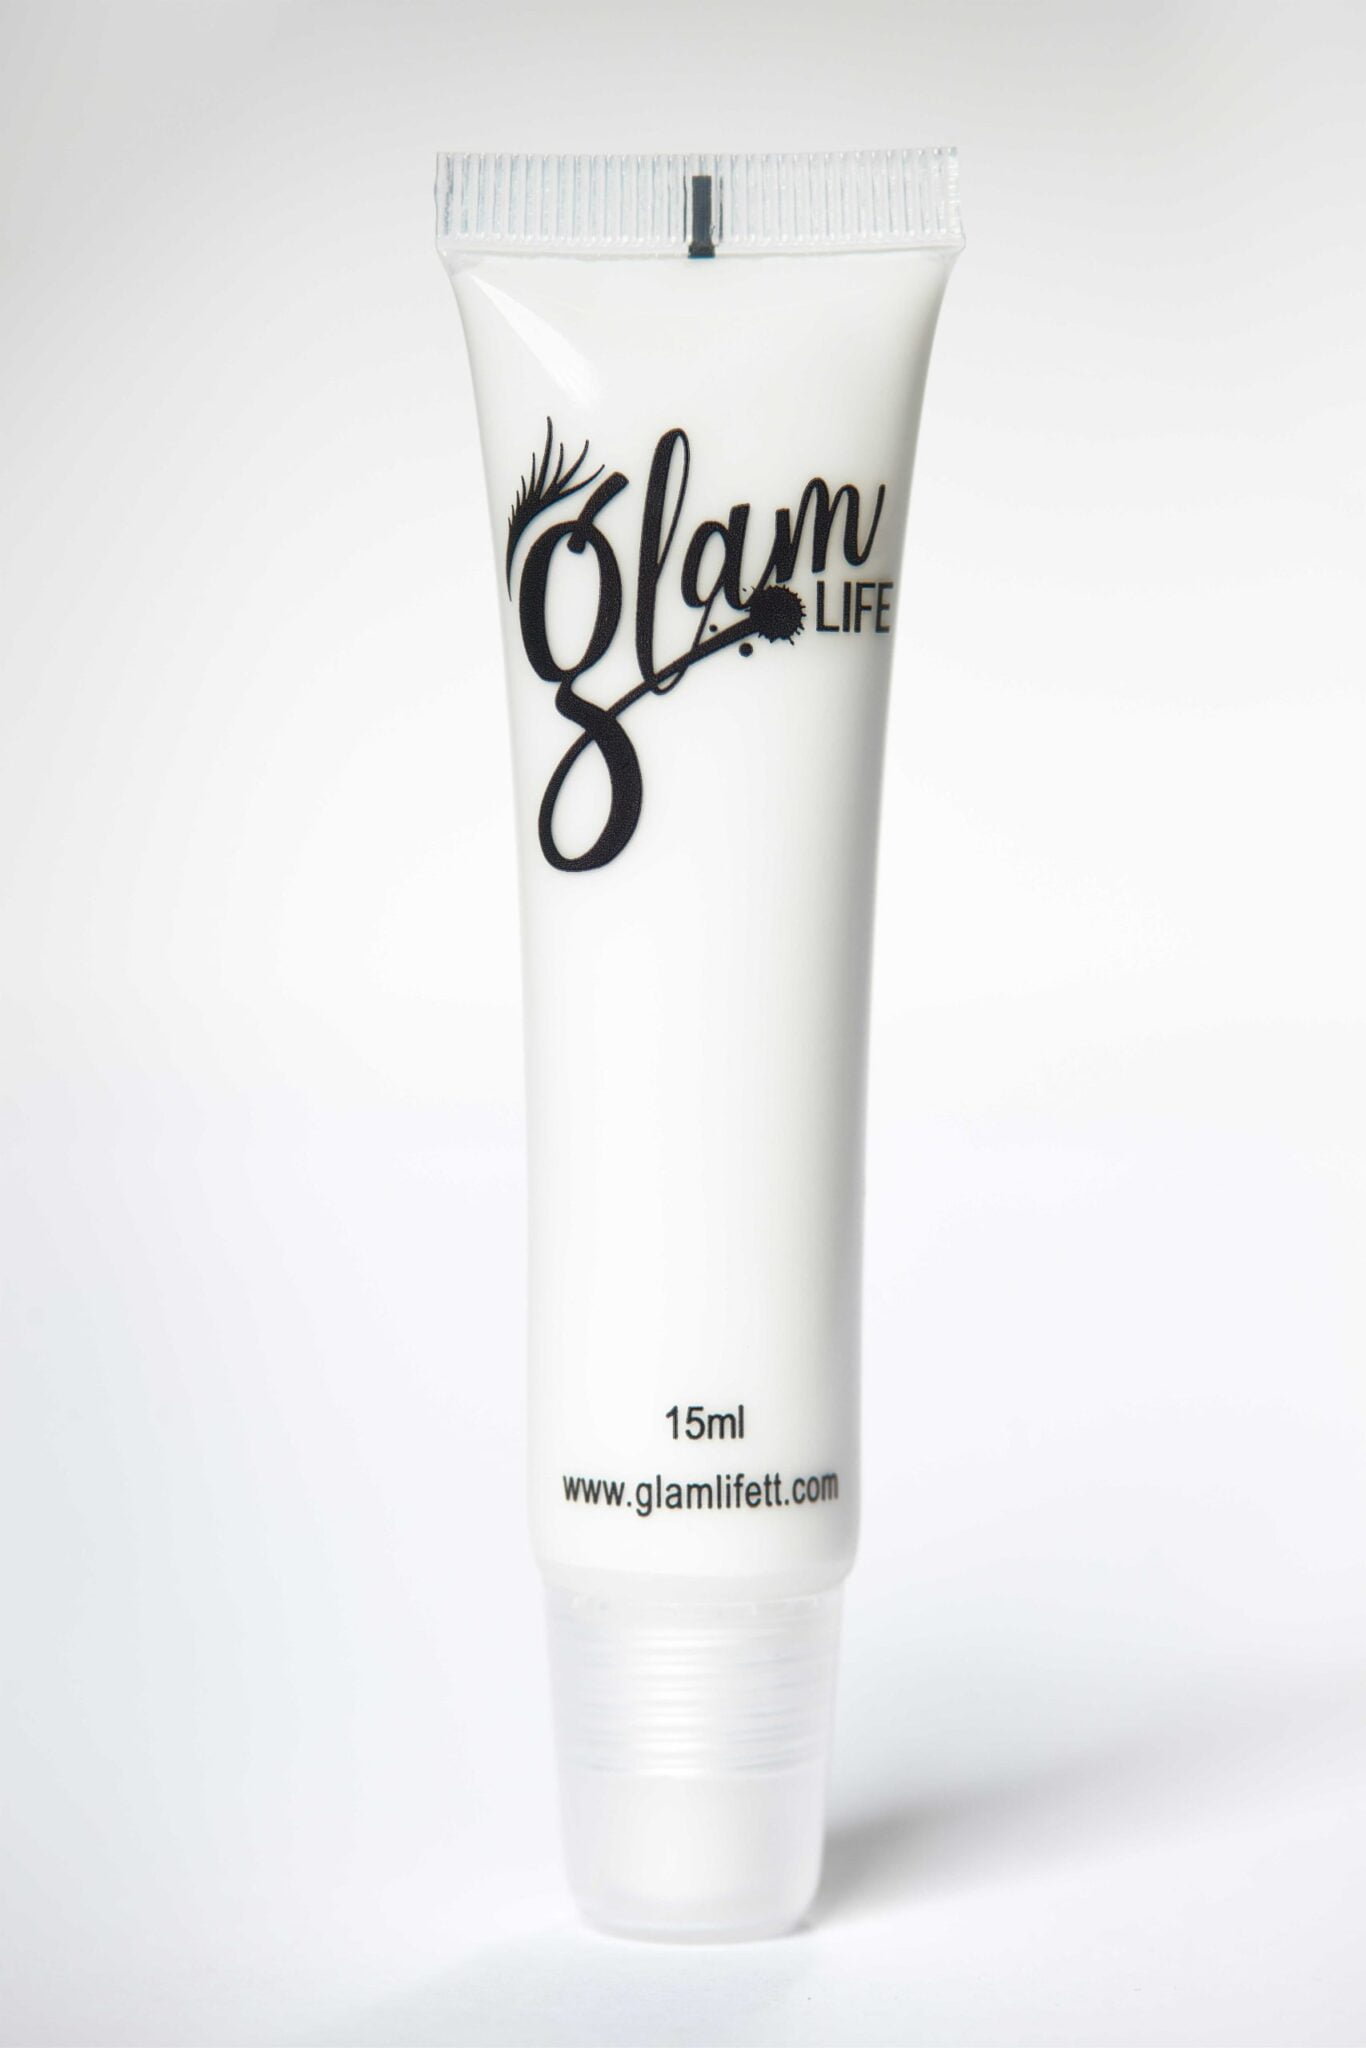 Glam Life Grip Life Lace Adhesive Glider